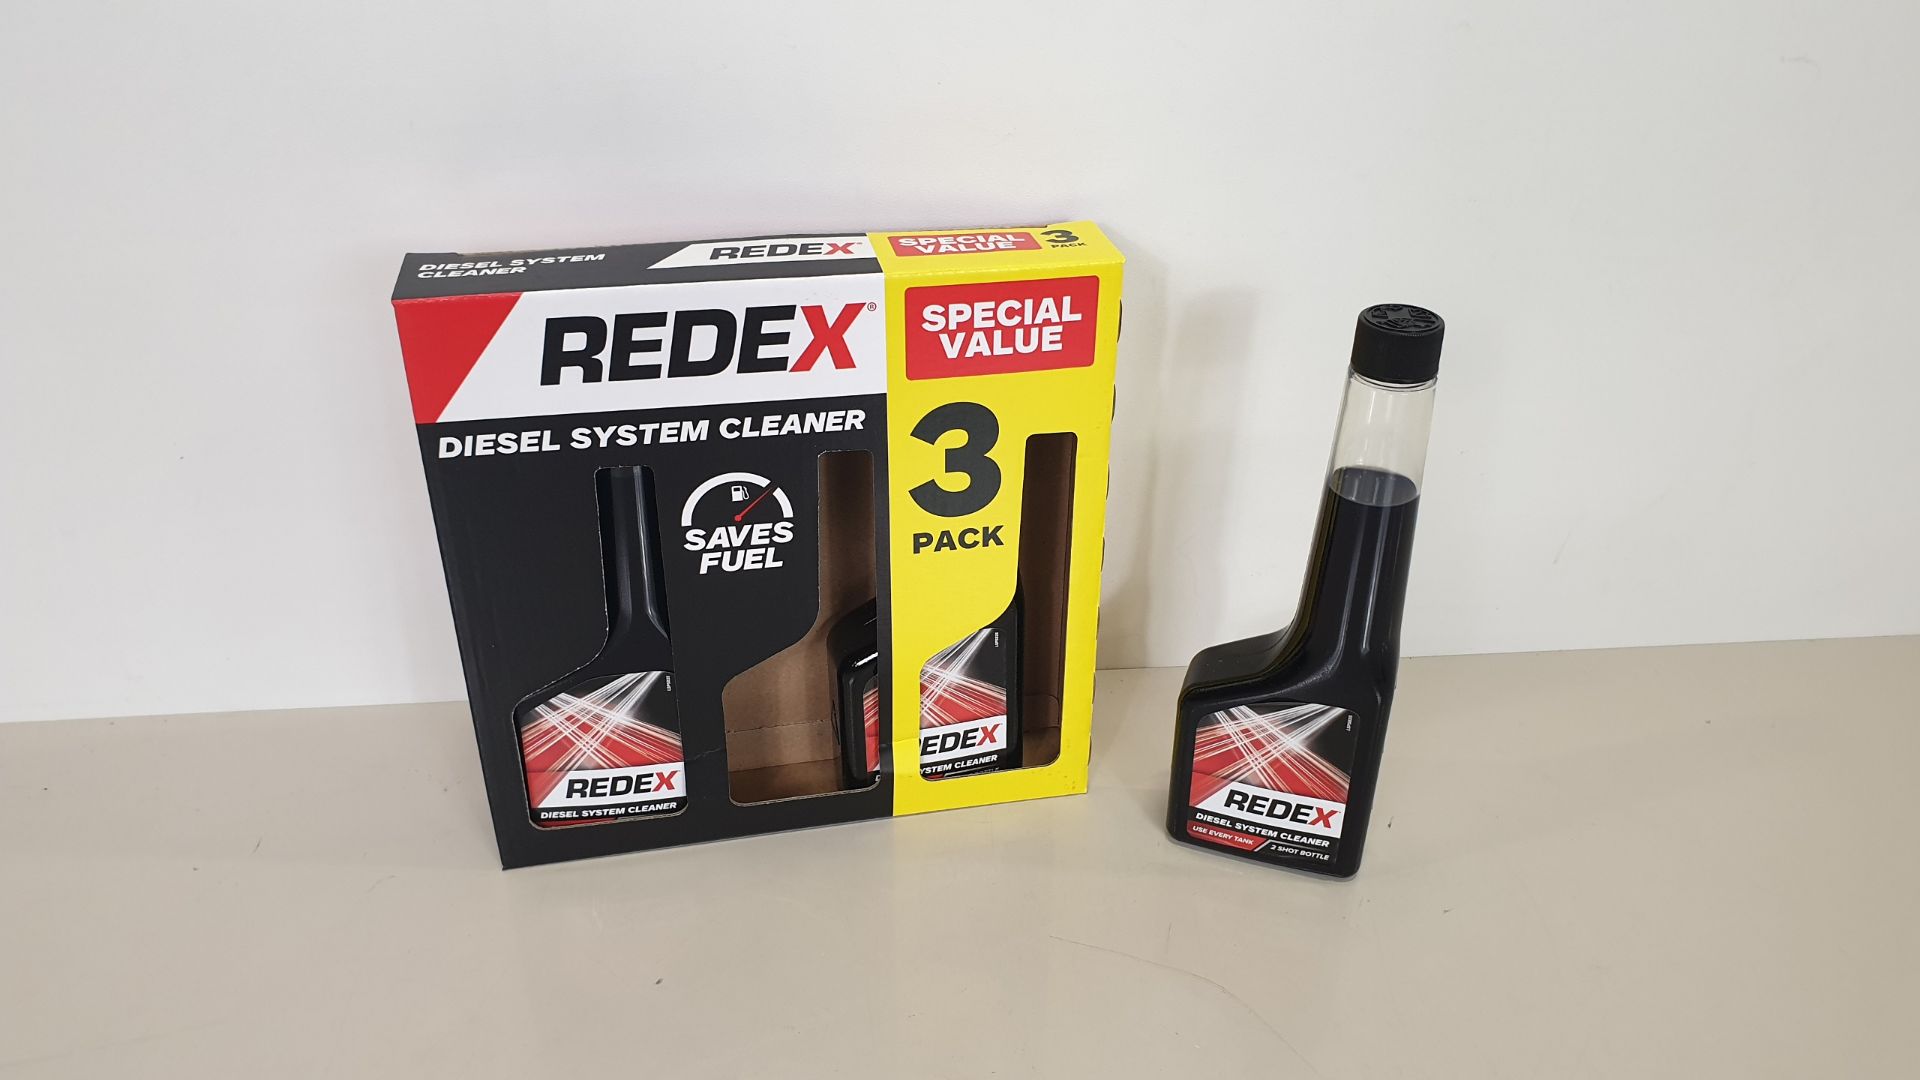 18 X PACKS OF 3 250 ML REDEX DIESEL SYSTEM CLEANER - IN 3 CARTONS (RADD0007A)